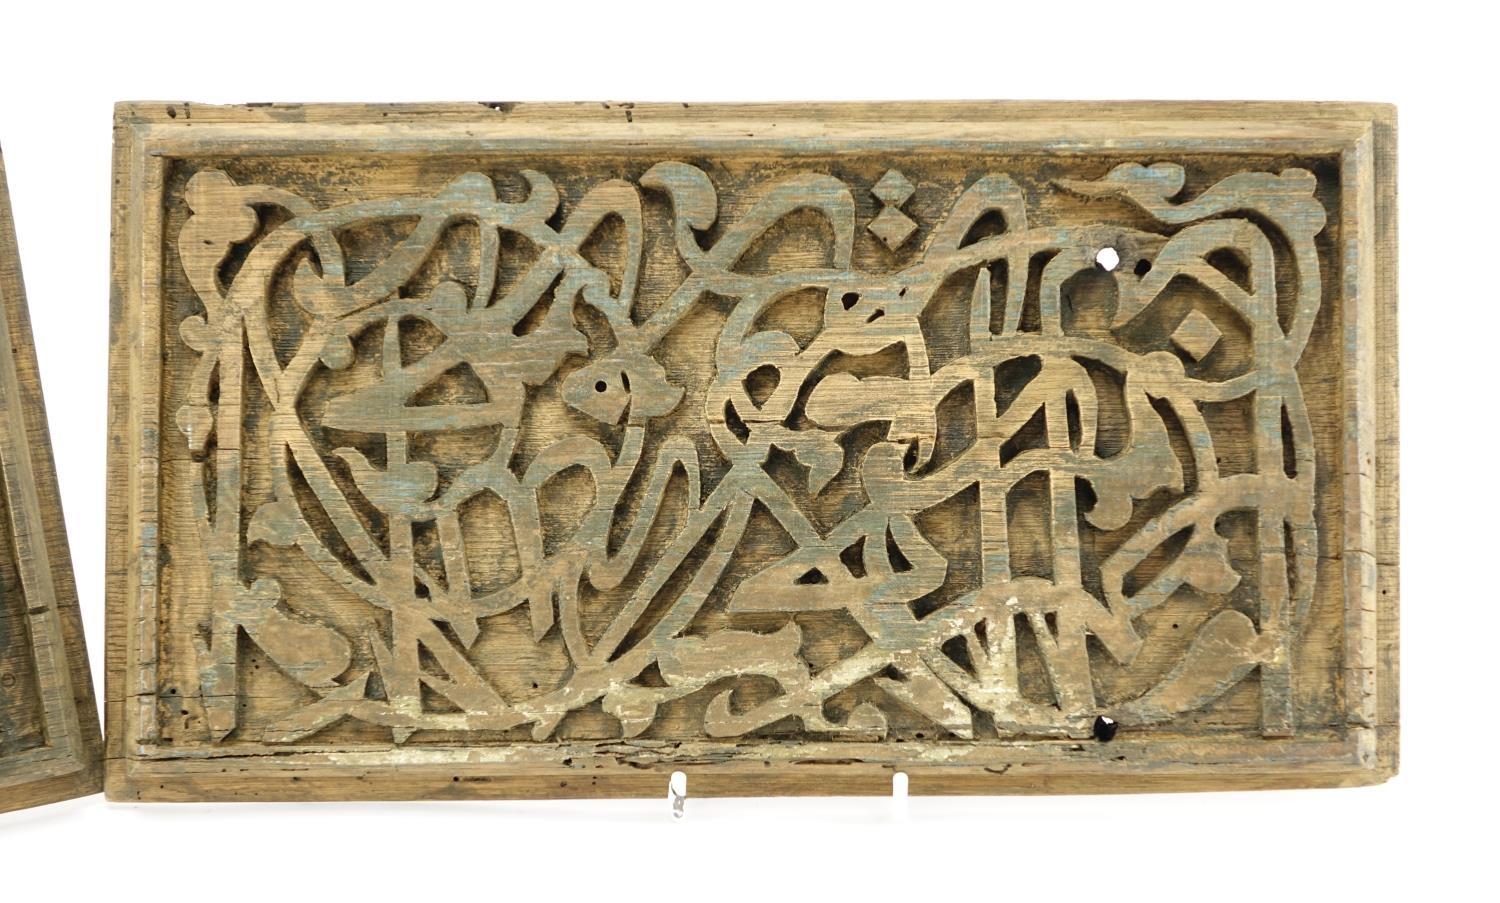 Pair of 15th/16th century Islamic wooden panels carved with script, each 35cm x 19.5cm ( - Image 3 of 4